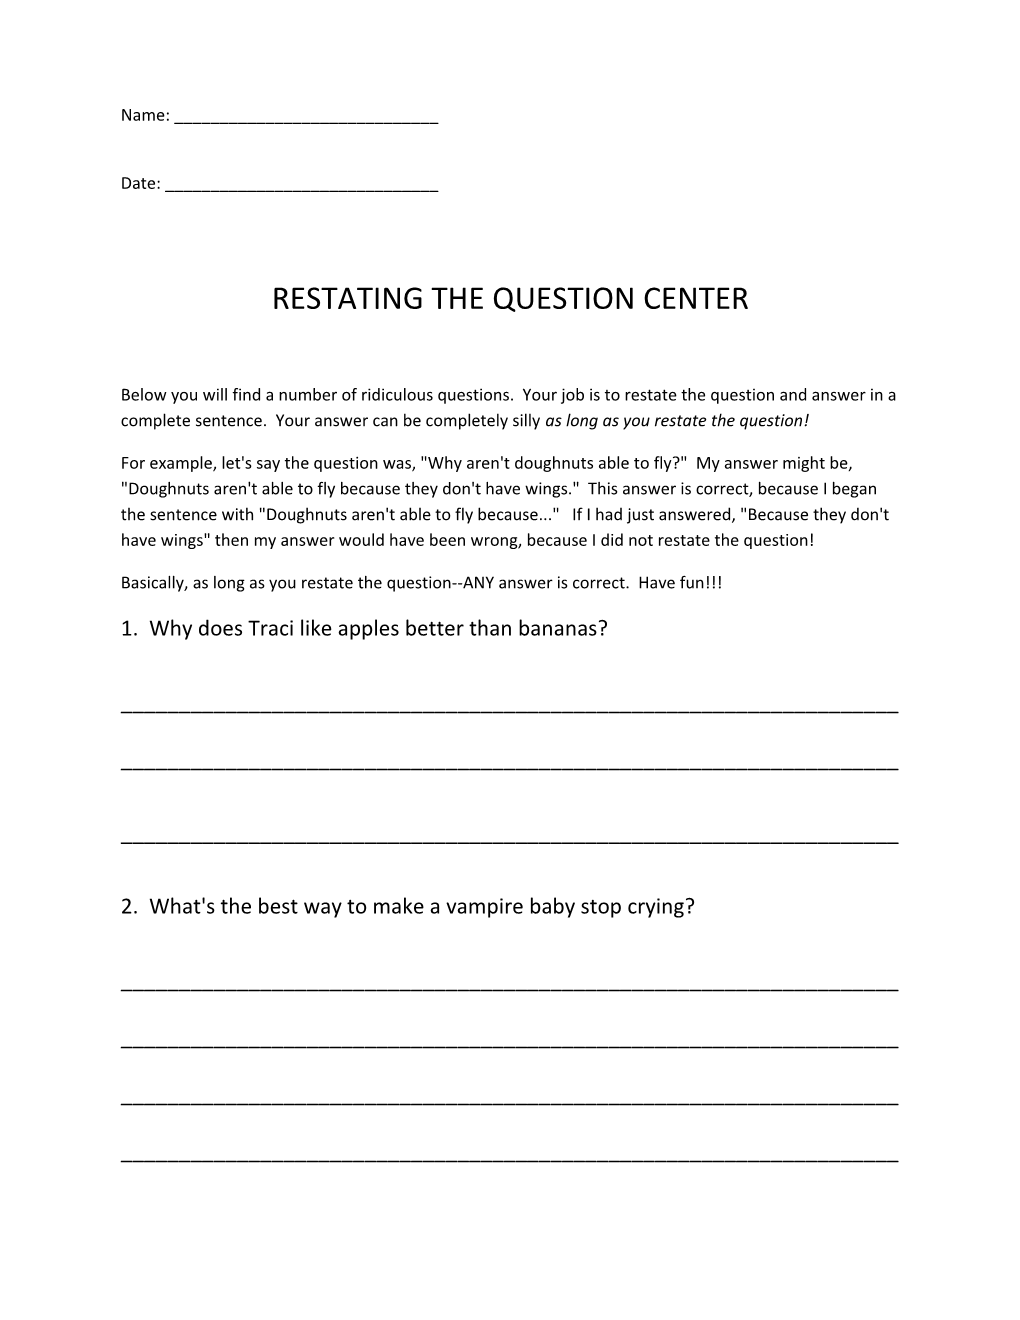 Restating the Question Center